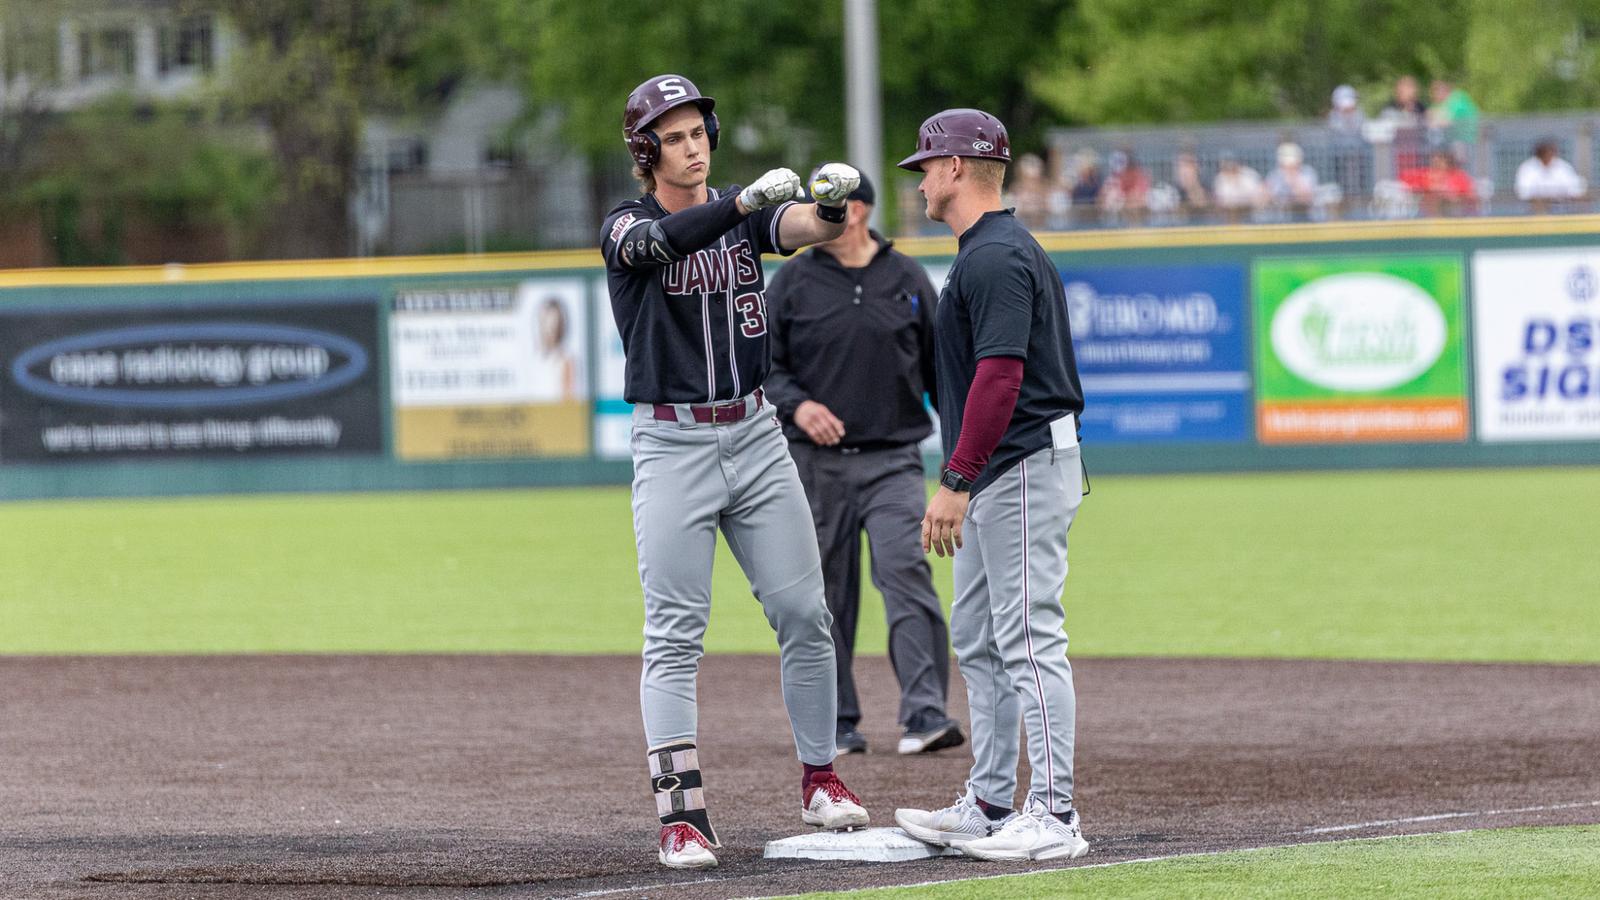 Preview | Saluki Baseball Hosts No. 25 Indiana State for Weekend Series